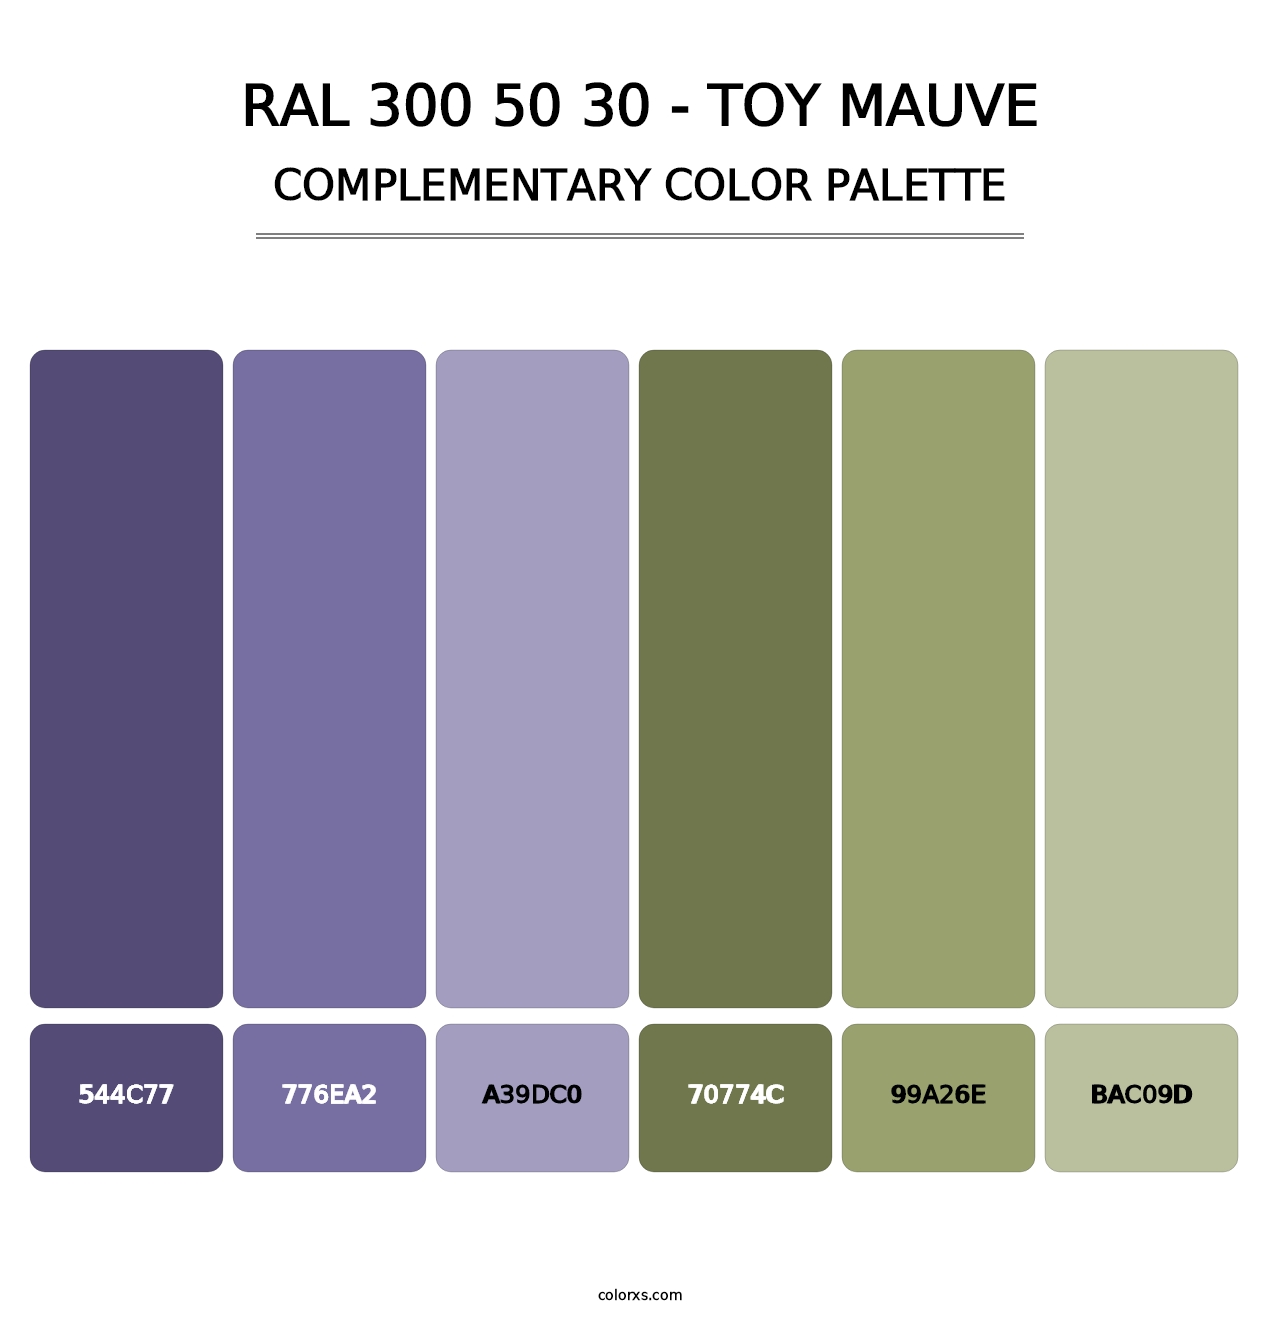 RAL 300 50 30 - Toy Mauve - Complementary Color Palette